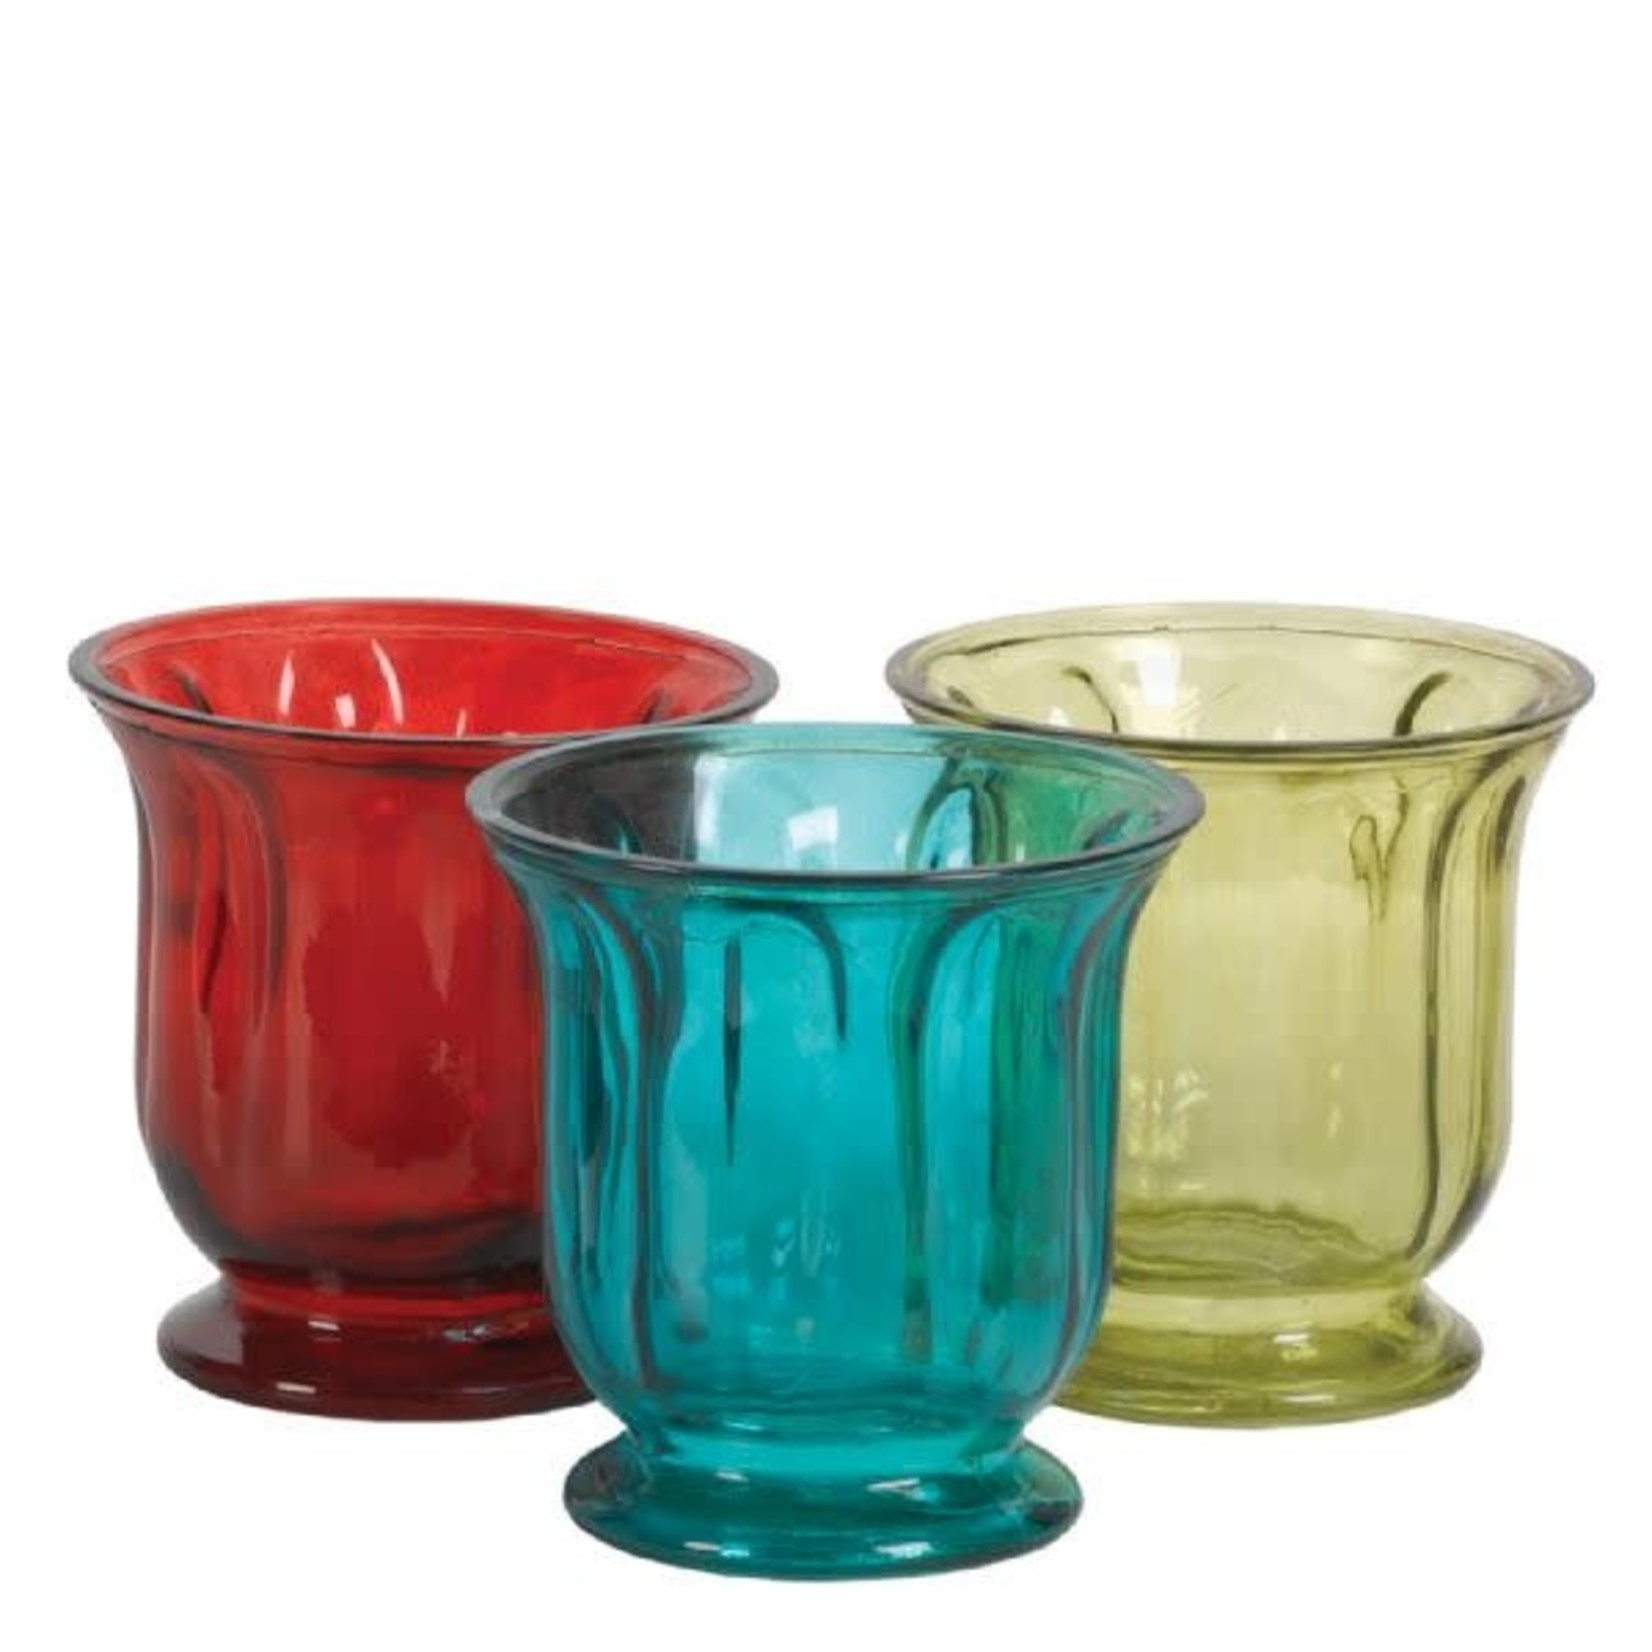 5.7" COLORED CANDLE HOLDERS REG $6.99